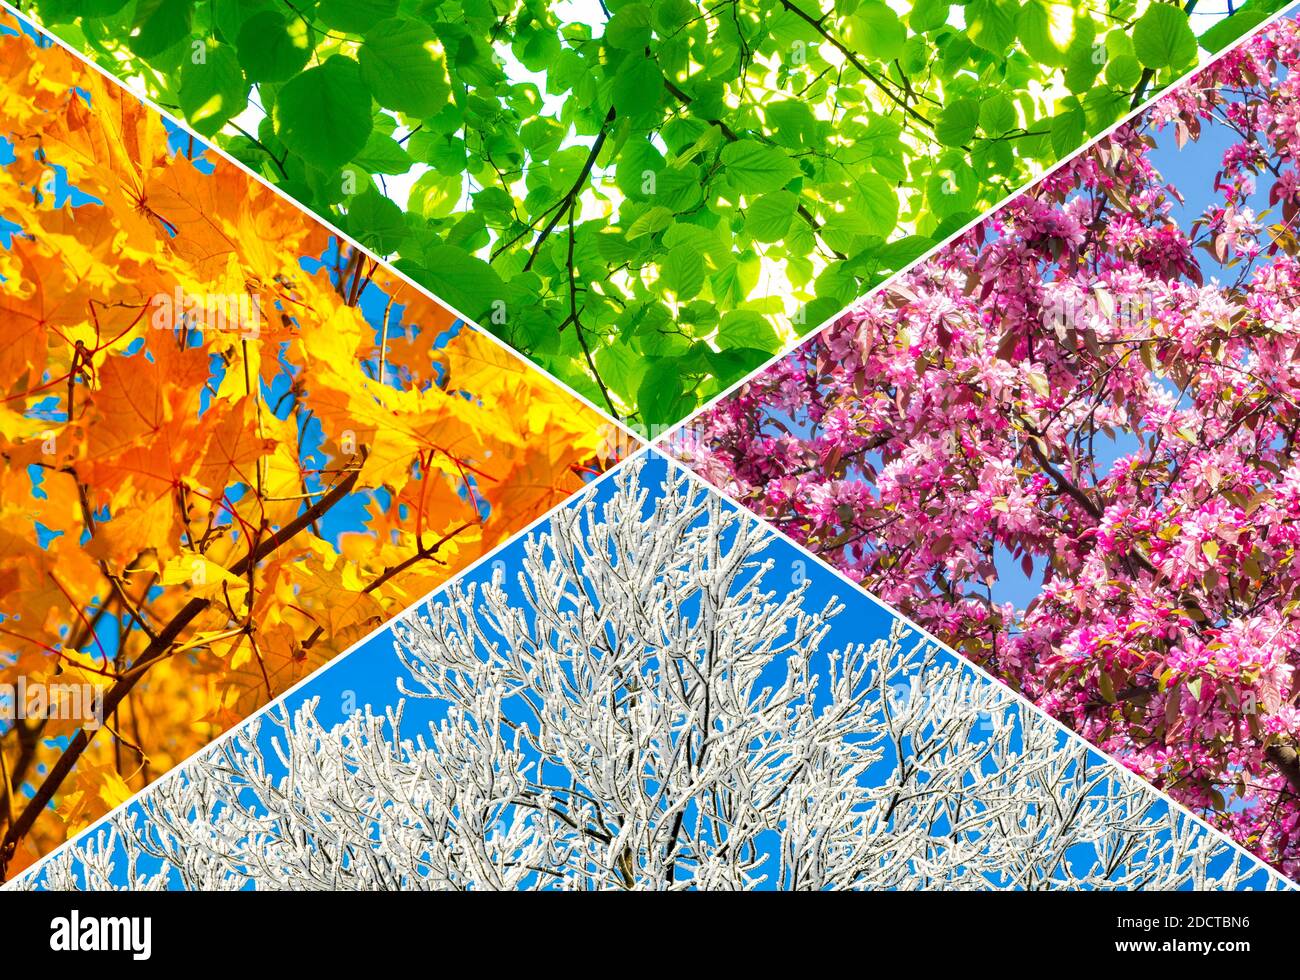 Collage of four tree pictures representing each season: spring, summer, autumn and winter. Stock Photo